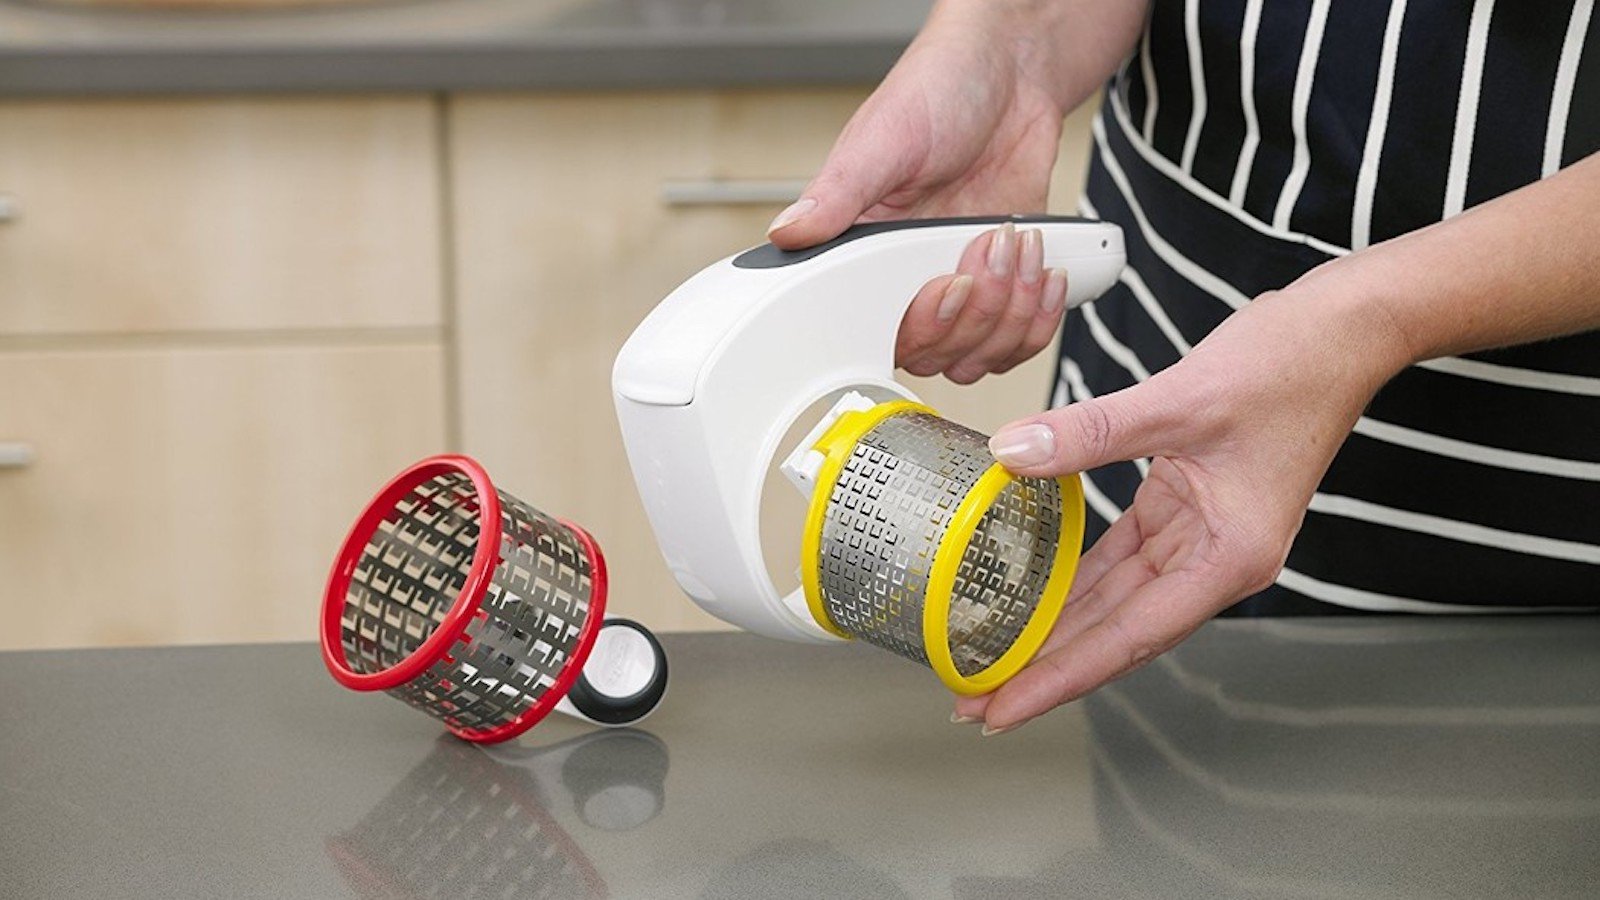 Zyliss Classic Rotary Cheese Grater food slicer quickly grates to save you time